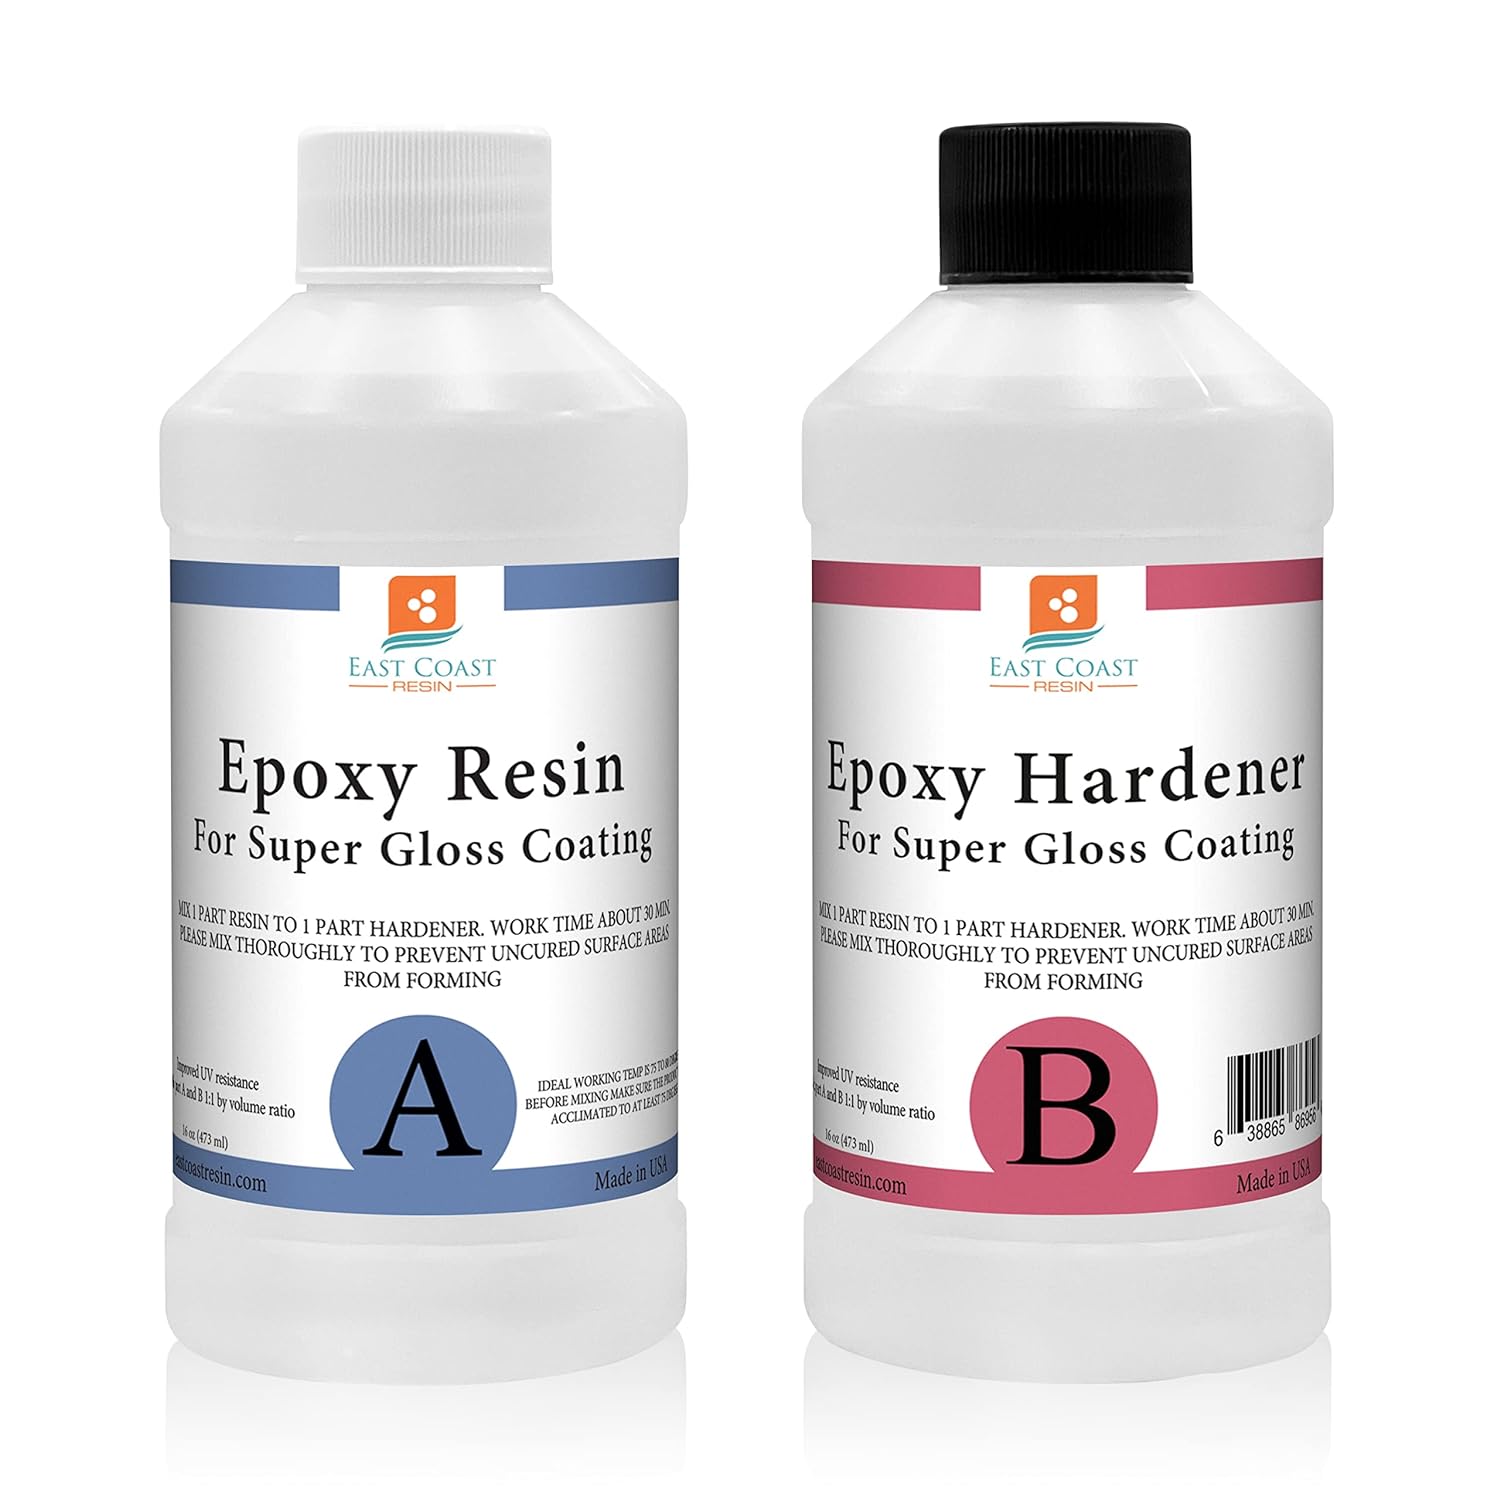 Generic Epoxy Resin 32 Oz Kit, 1:1 Crystal Clear Resin and Hardener for  Super Gloss Coating